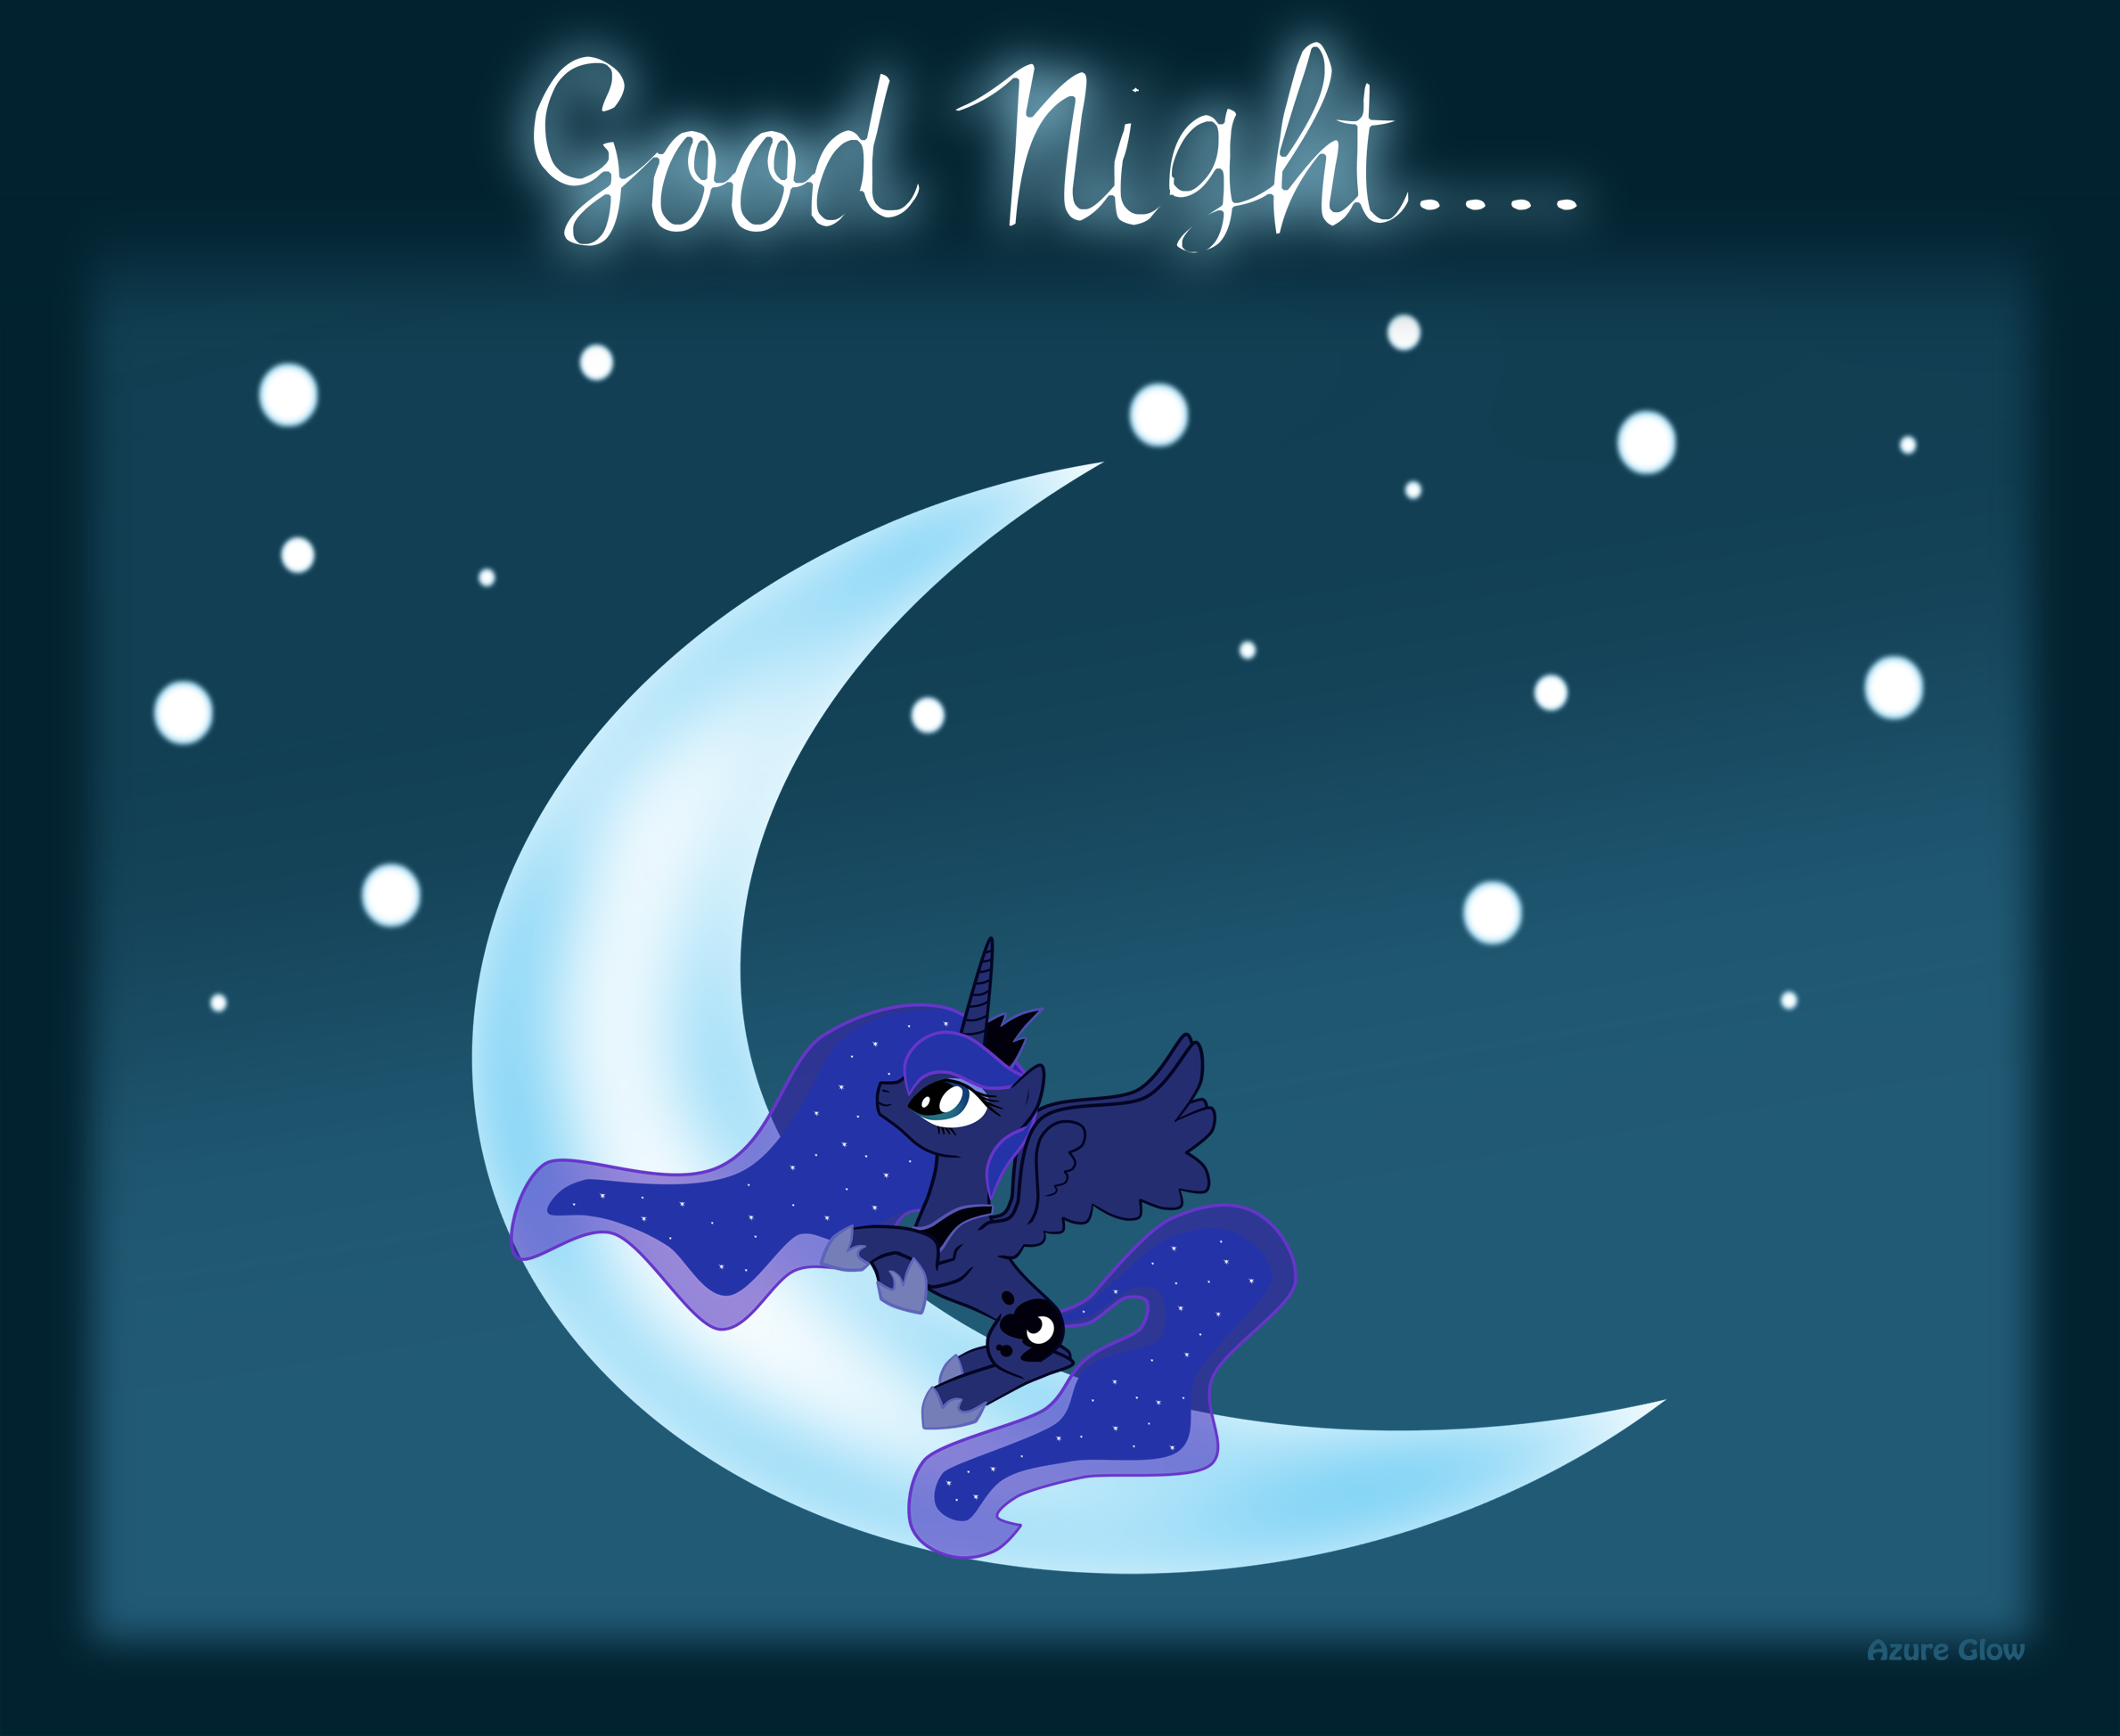 48349__safe_solo_princess+luna_moon_stars_tangible+heavenly+object_artist-colon-mlpazureglow_goodnight_good+night.png